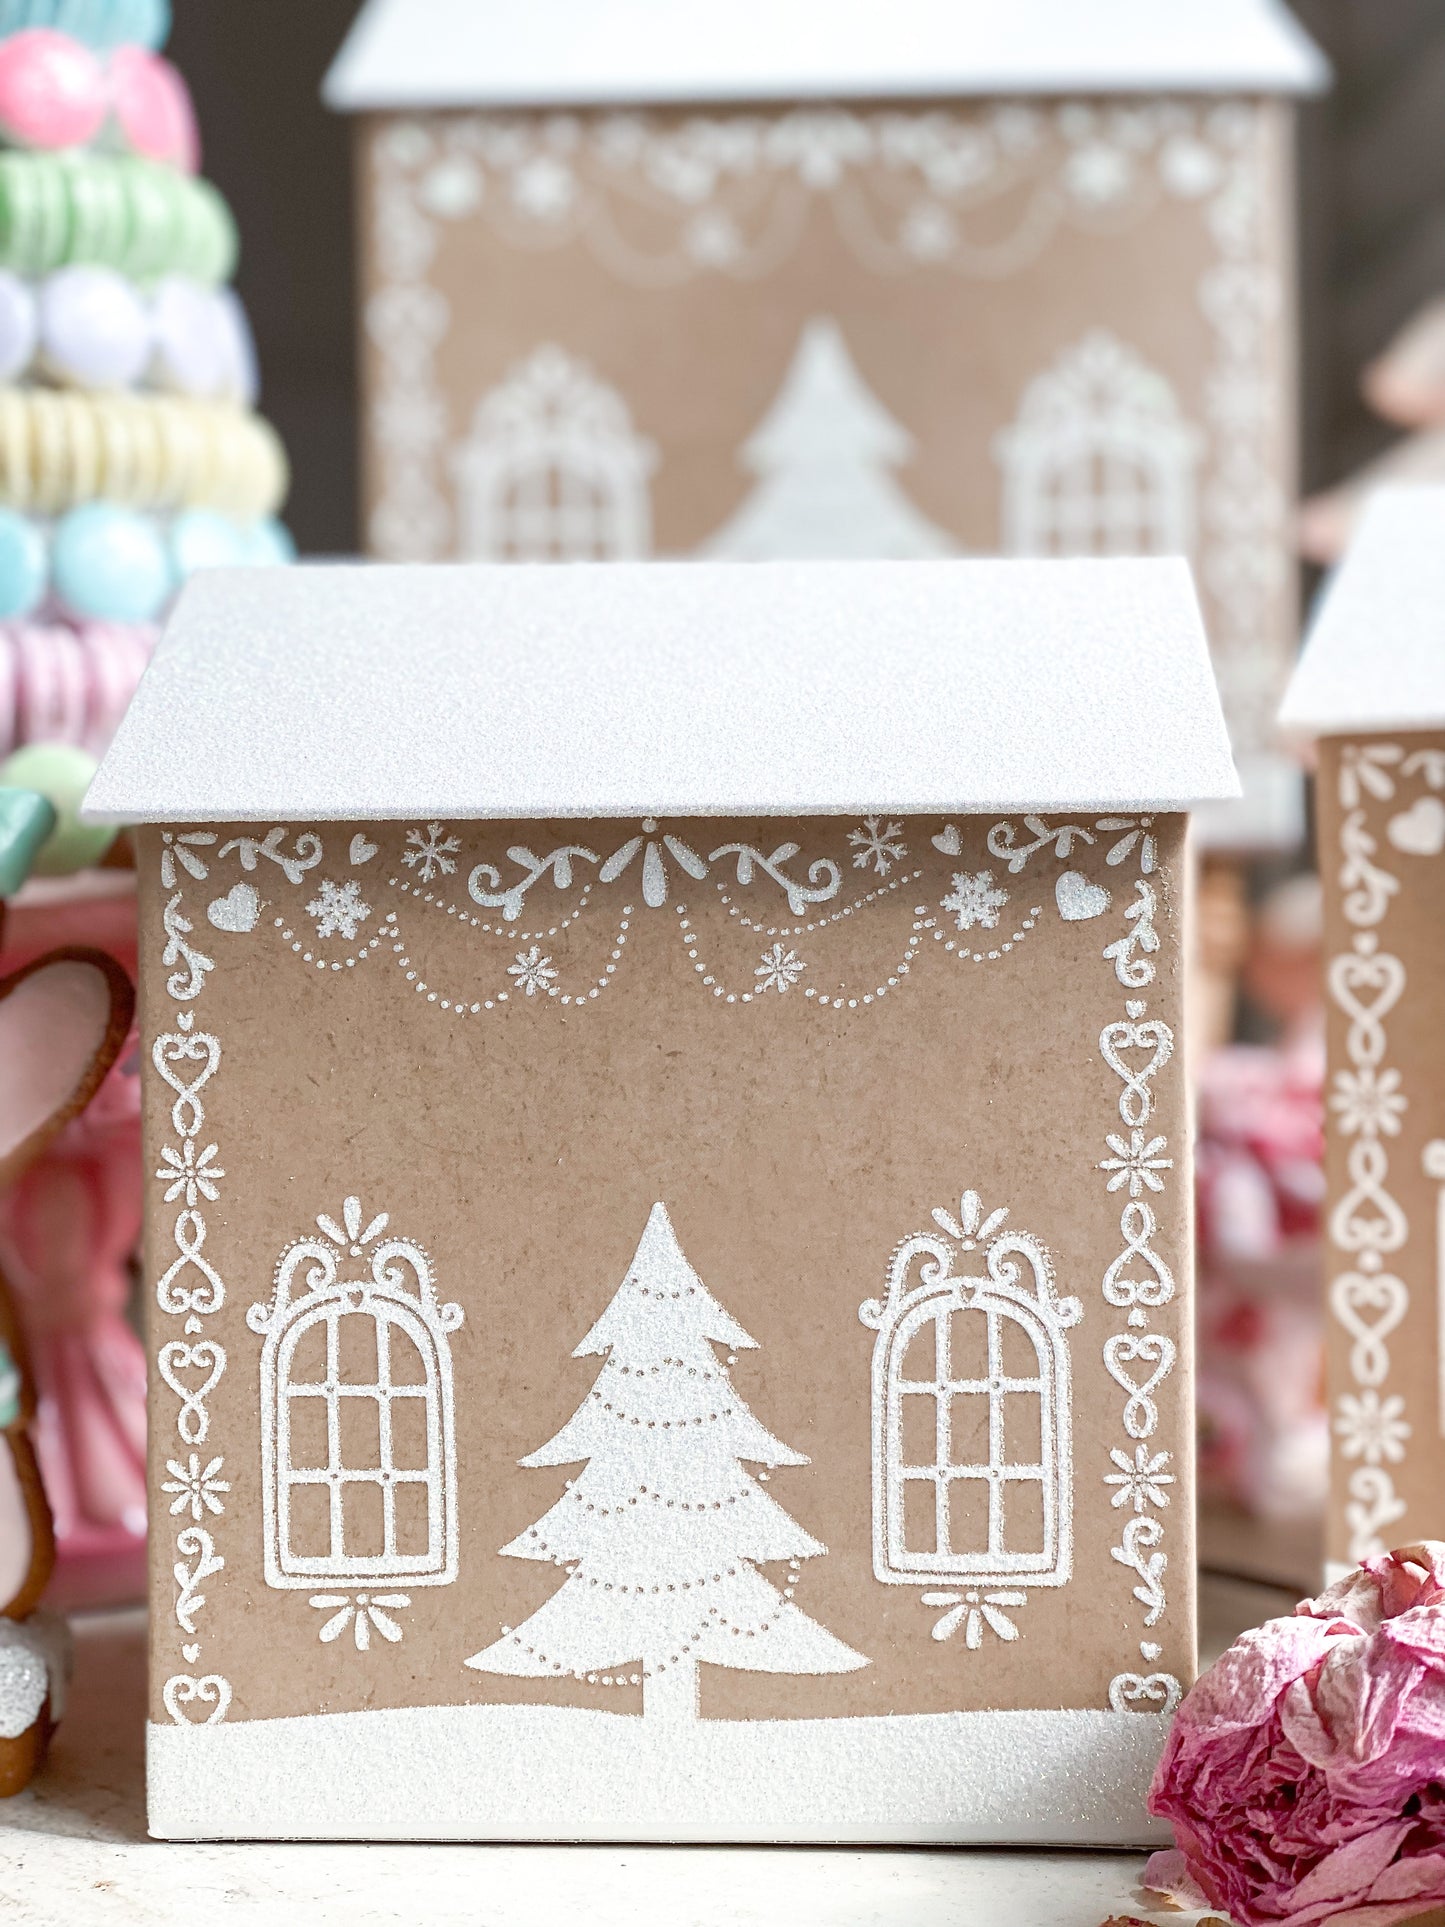 Set of 3 Gingerbread House nesting boxes